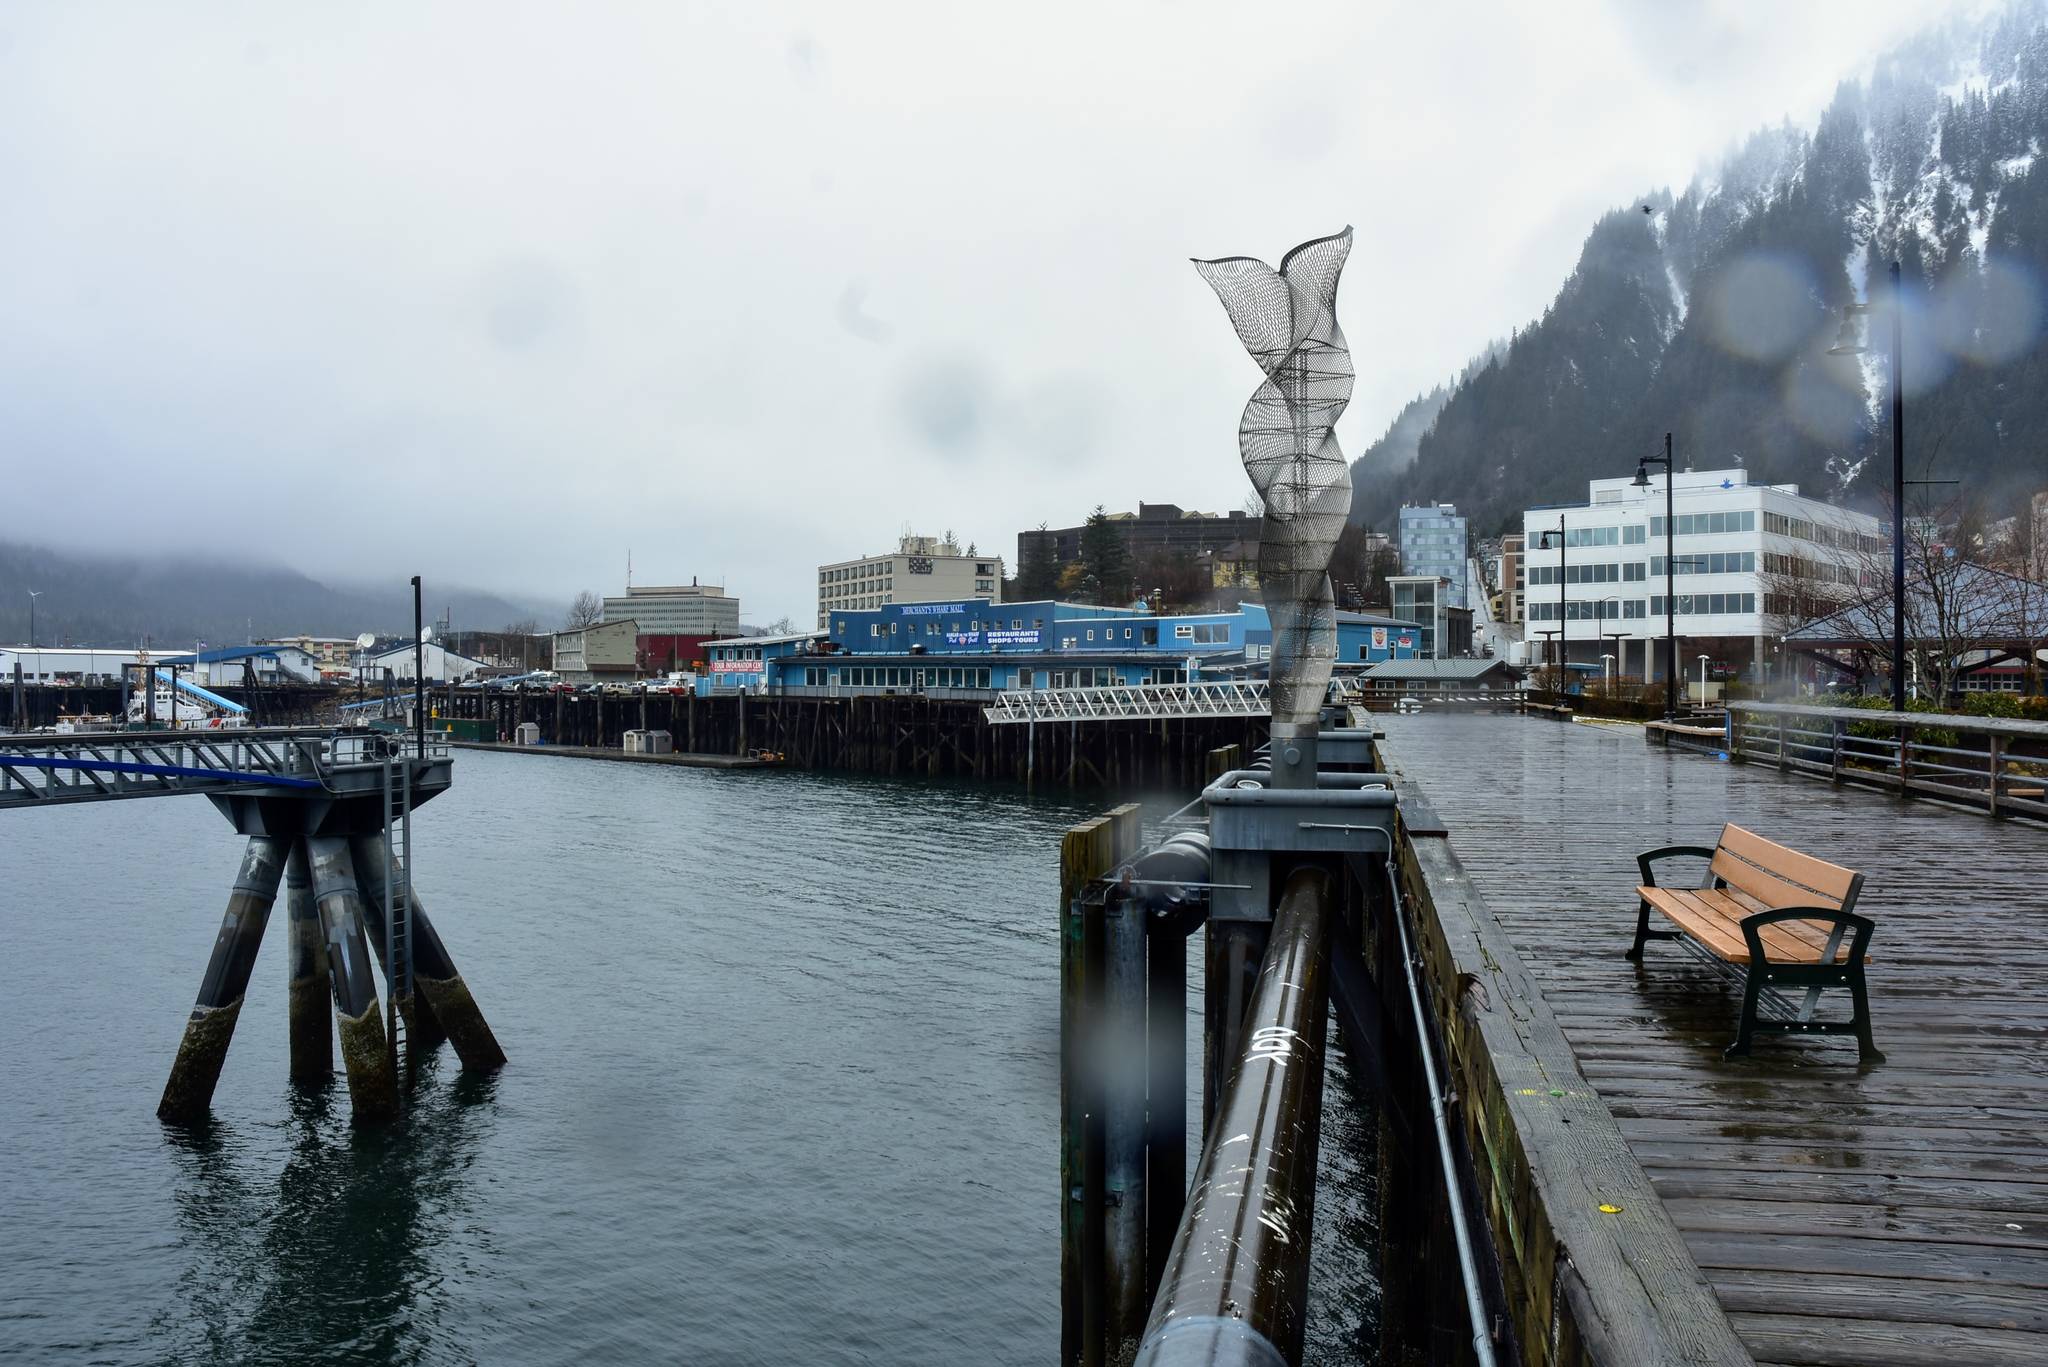 Peter Segall / Juneau Empire
Juneau’s downtown waterfront sits empty Monday. In a typical year, businesses would be getting ready for the flood of local tourists. But with the COVID-19 pandemic still ongoing, Alaska’s cruise ship season remains uncertain.